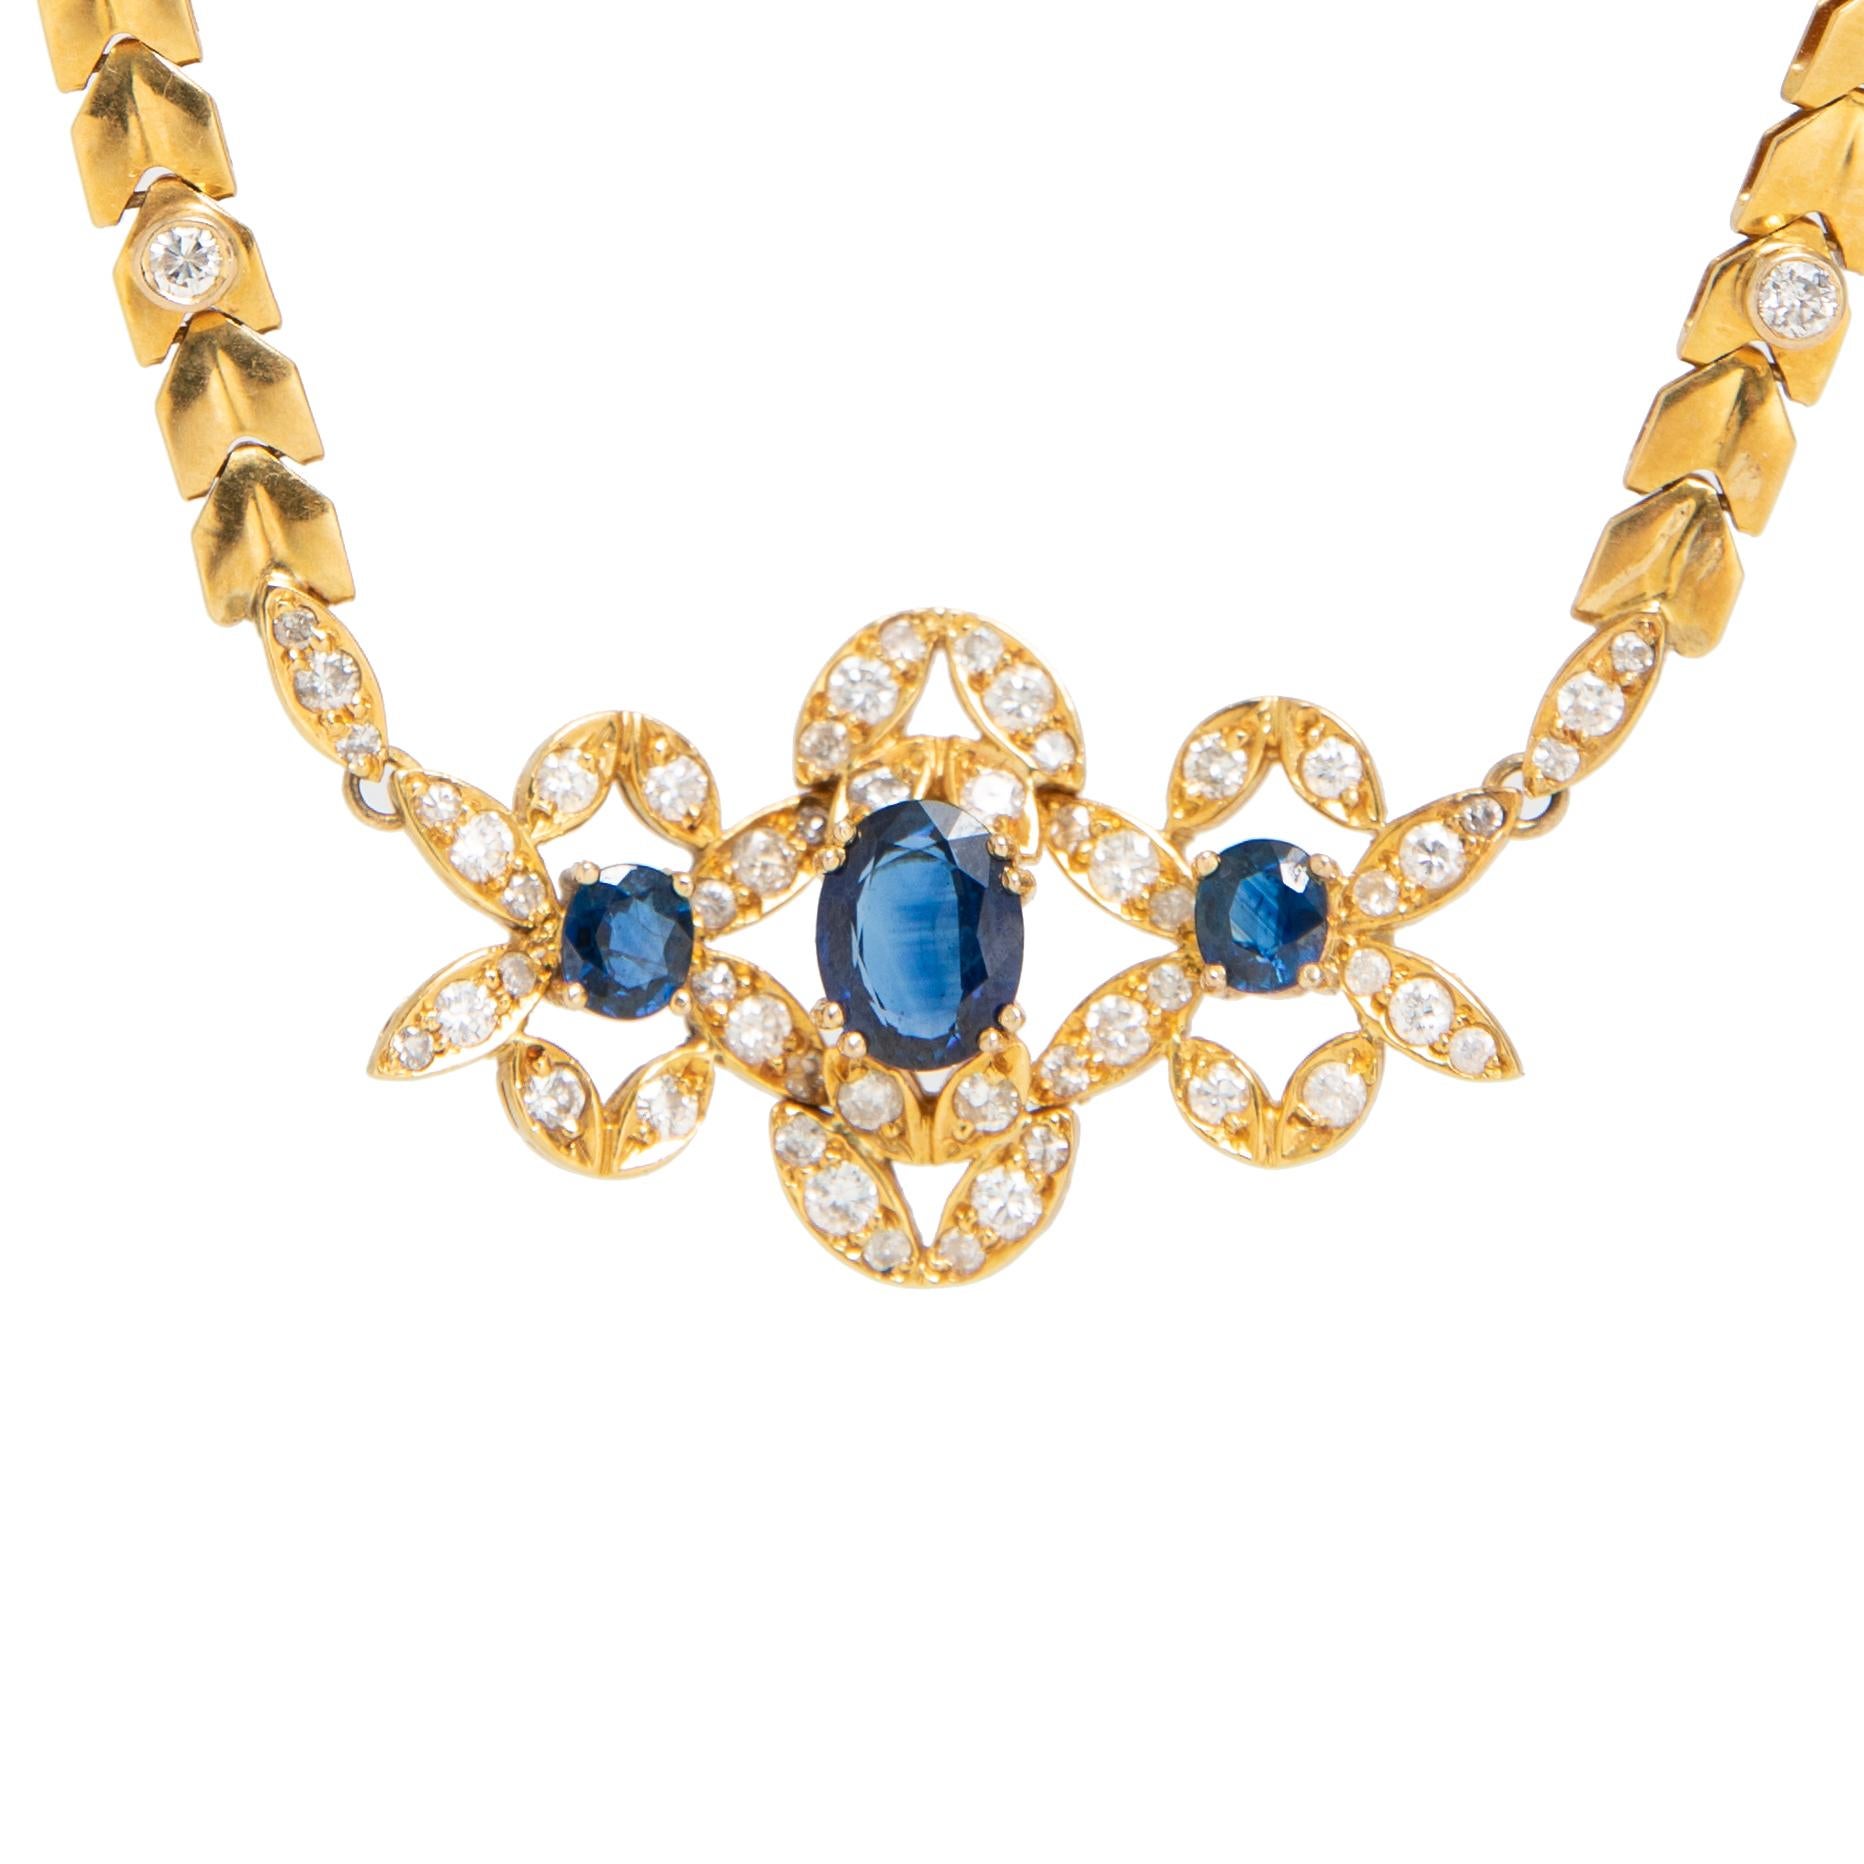 A Yellow Gold, Sapphire and Diamond necklace containing one oval shape mixed cut sapphire measuring approximately 9.00 x 6.95 x 3.20 mm, two oval shape mixed cut sapphires and 66 round brilliant cut diamonds weighing approximately 1.75 carats total